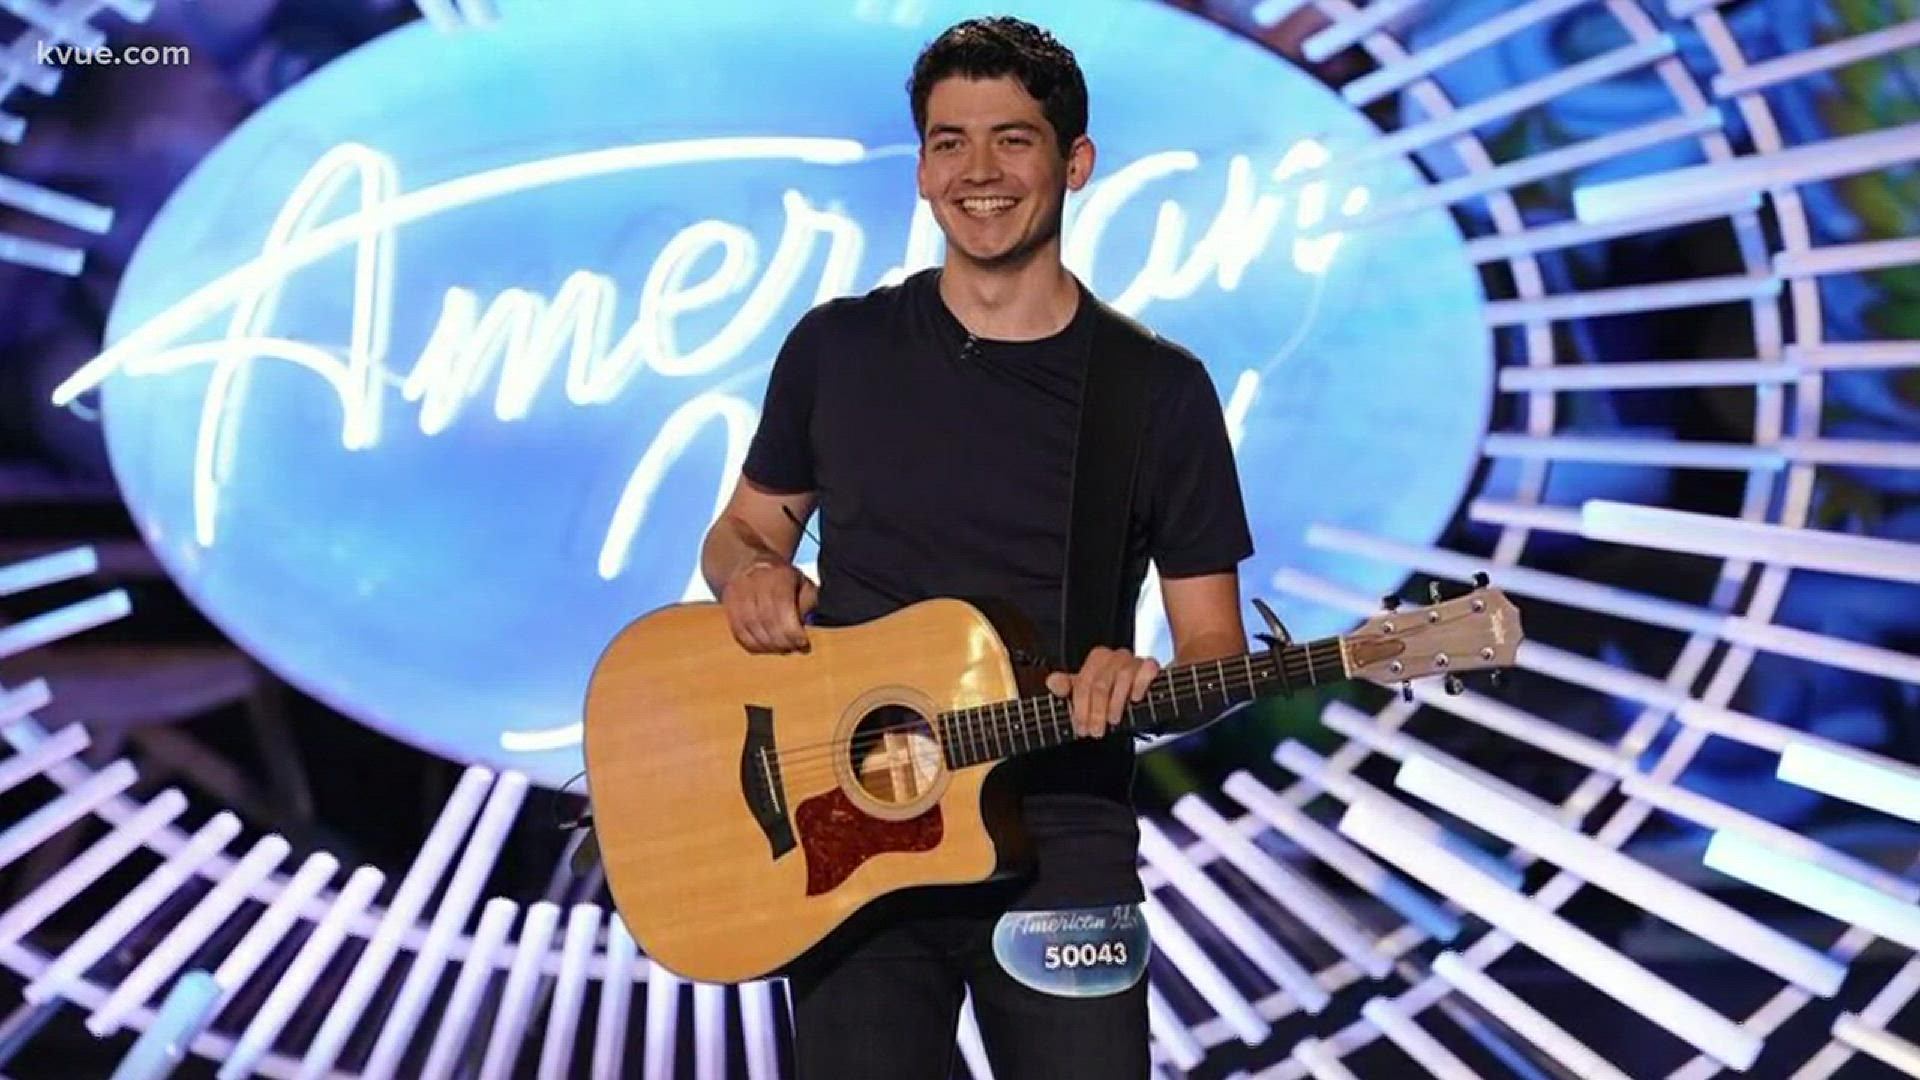 American idol is officially back!